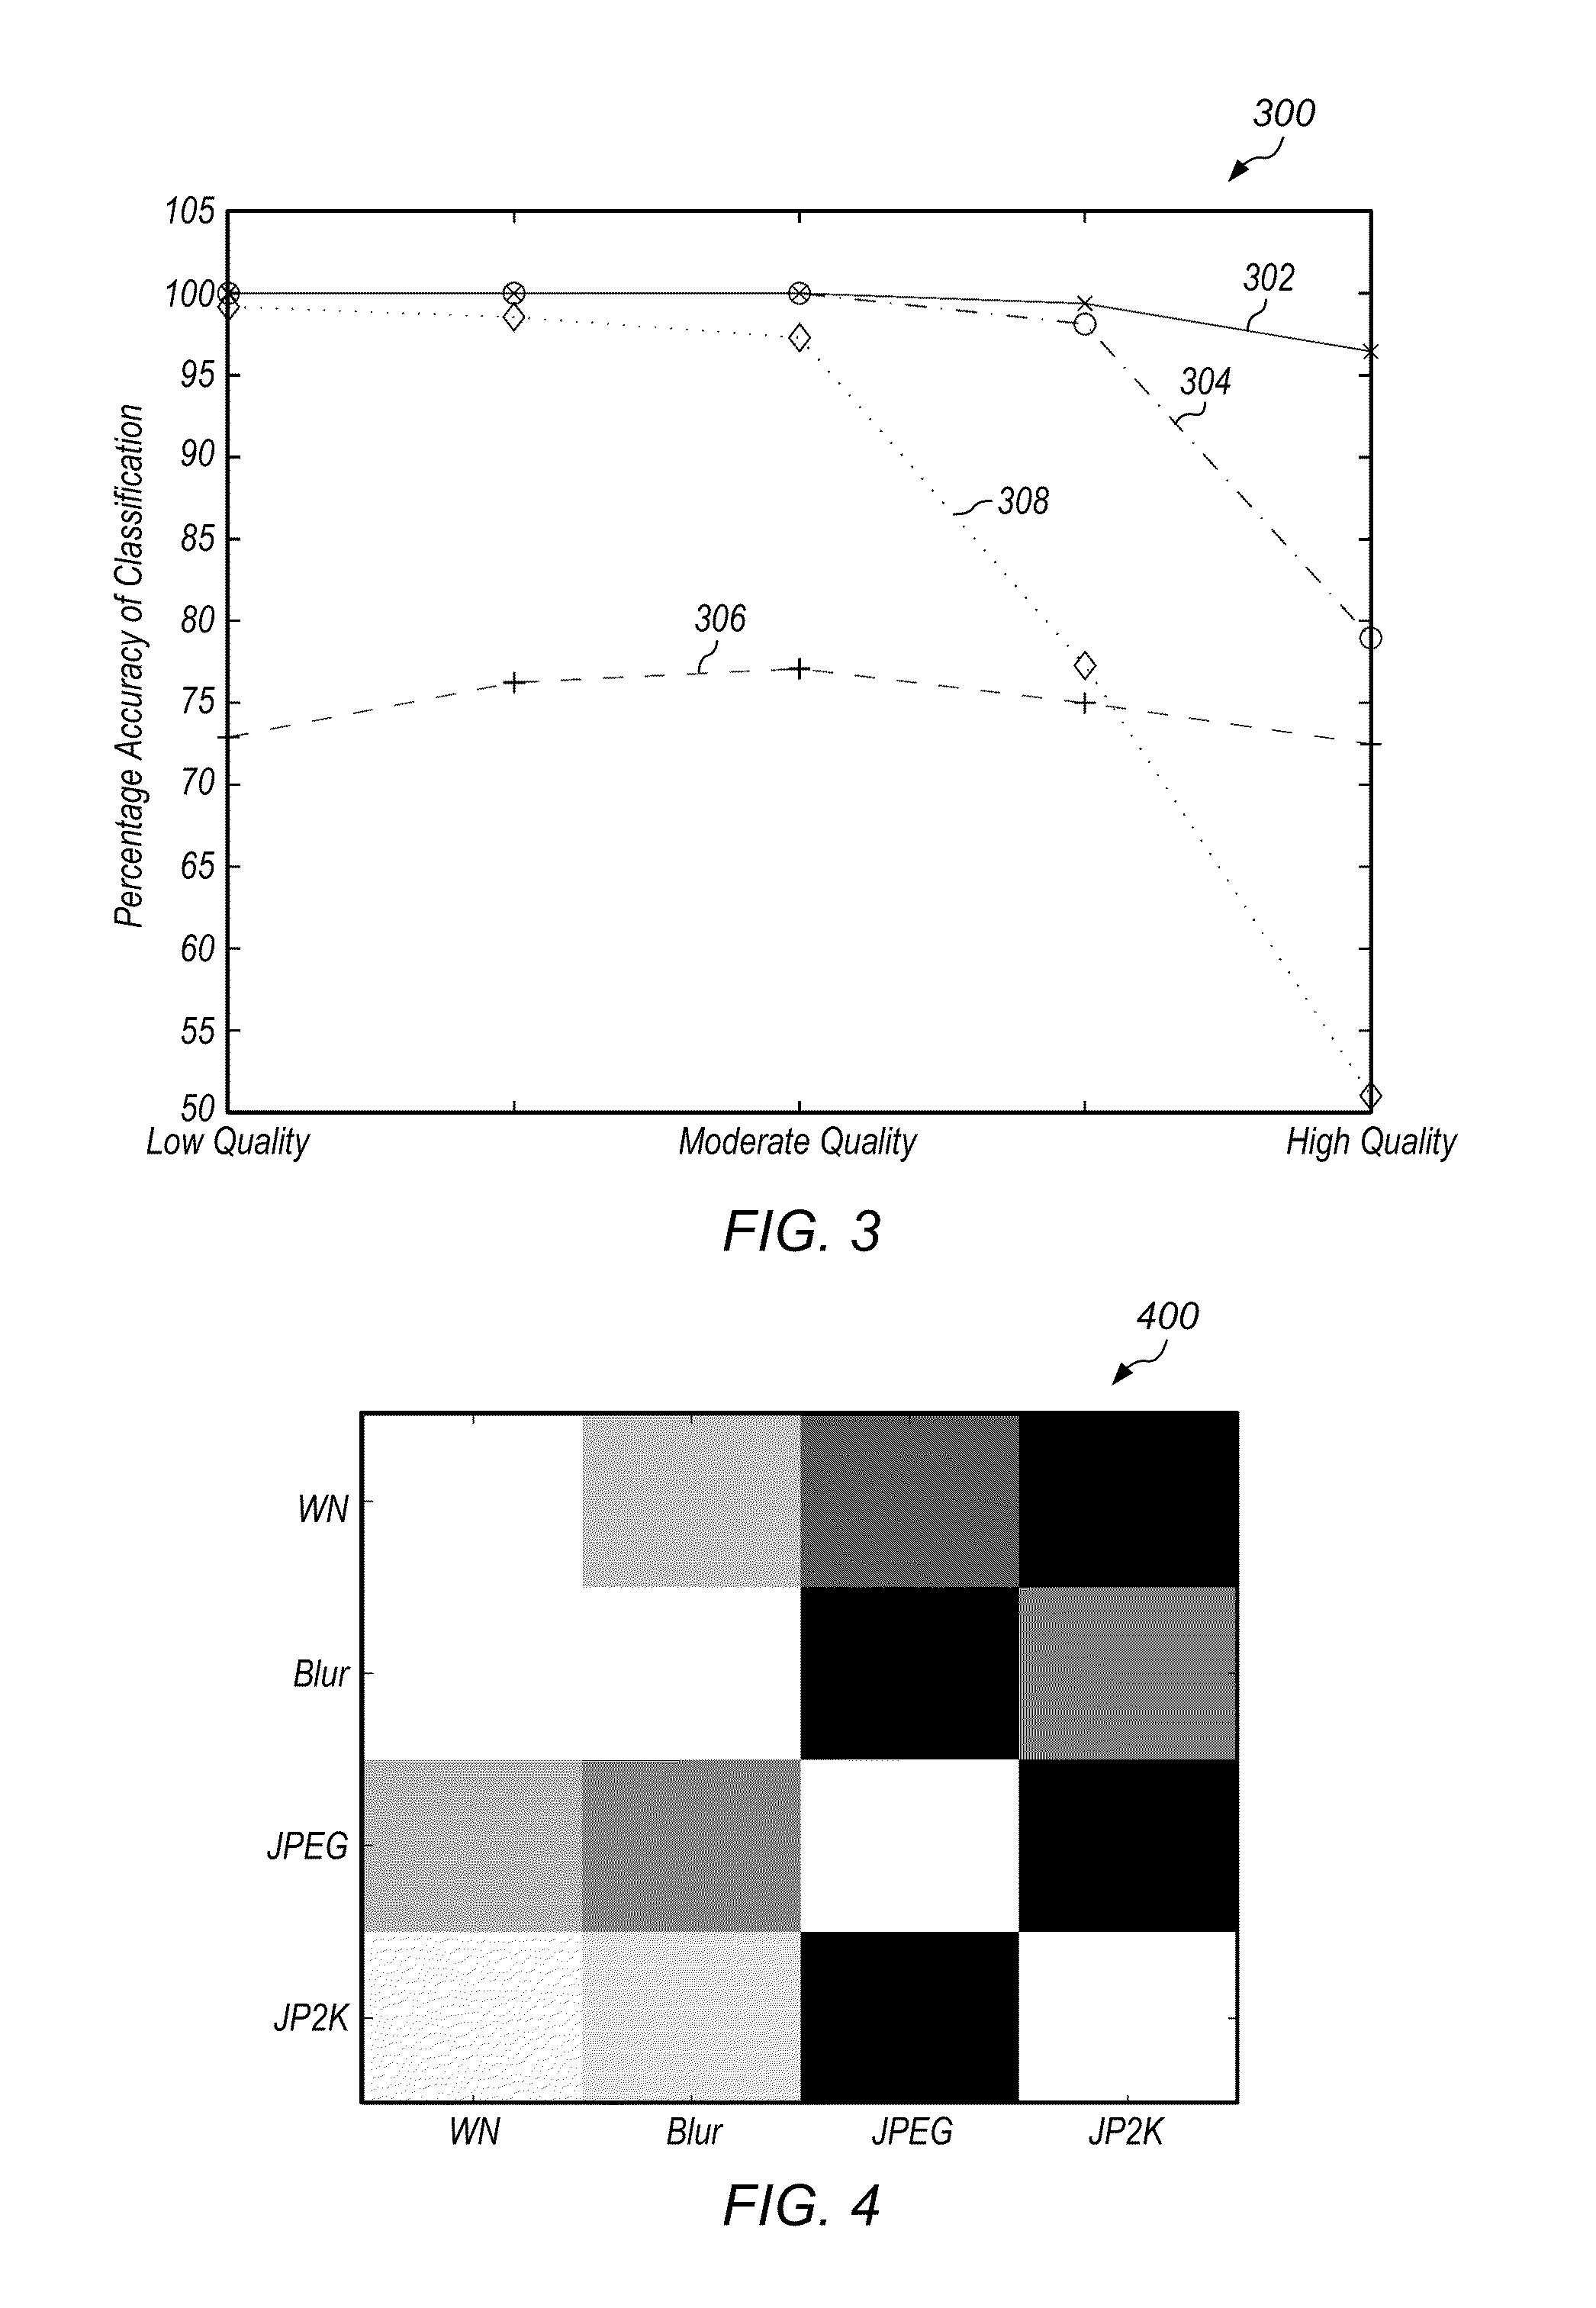 Determining quality of an image or video using a distortion classifier